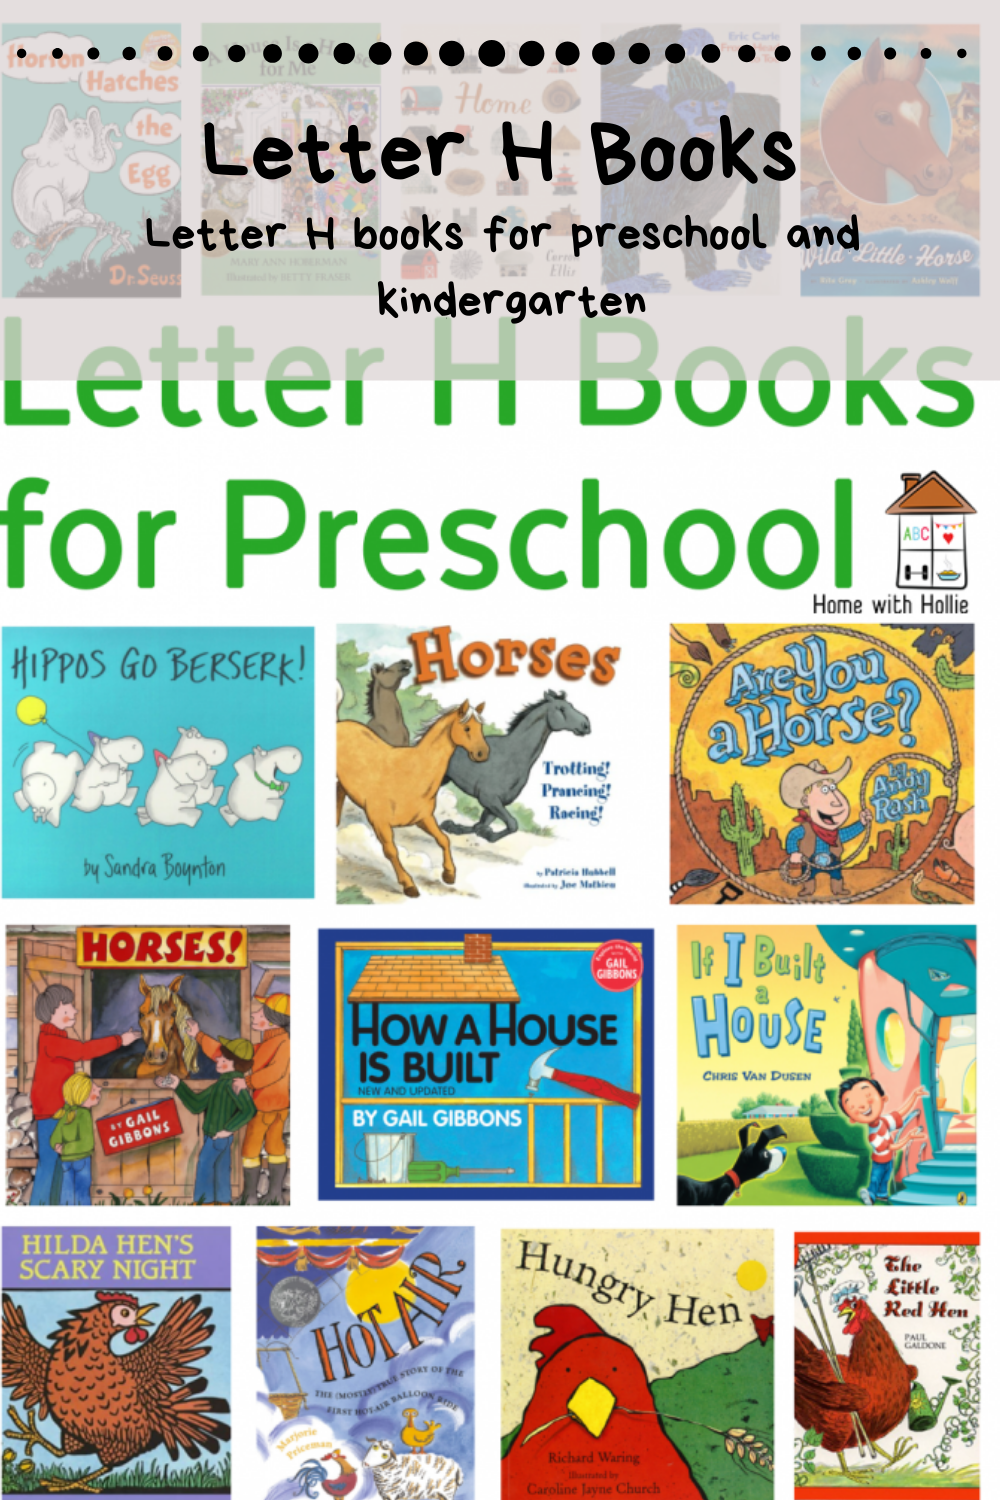 Letter H Books for Preschool and Kindergarten - Home With Hollie